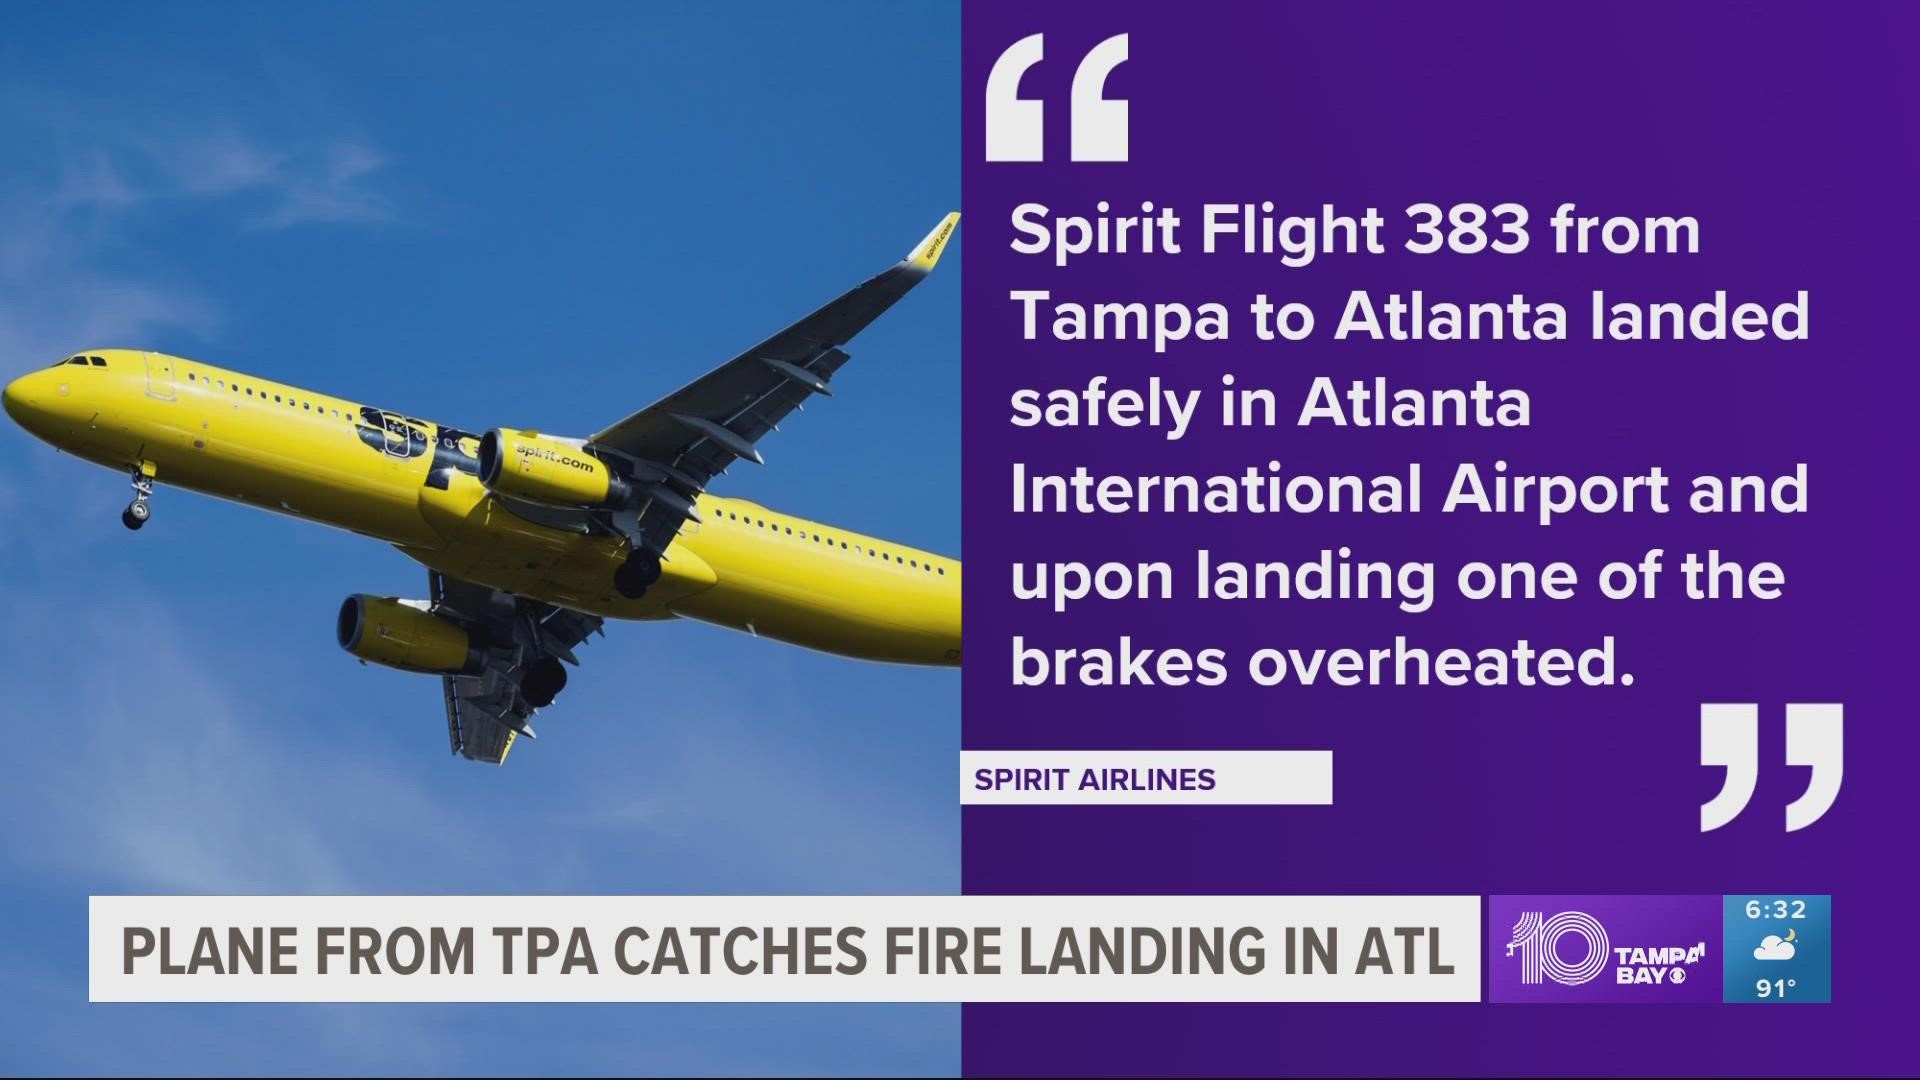 According to airport officials, the landing gear of the plane ignited around 9:25 a.m.